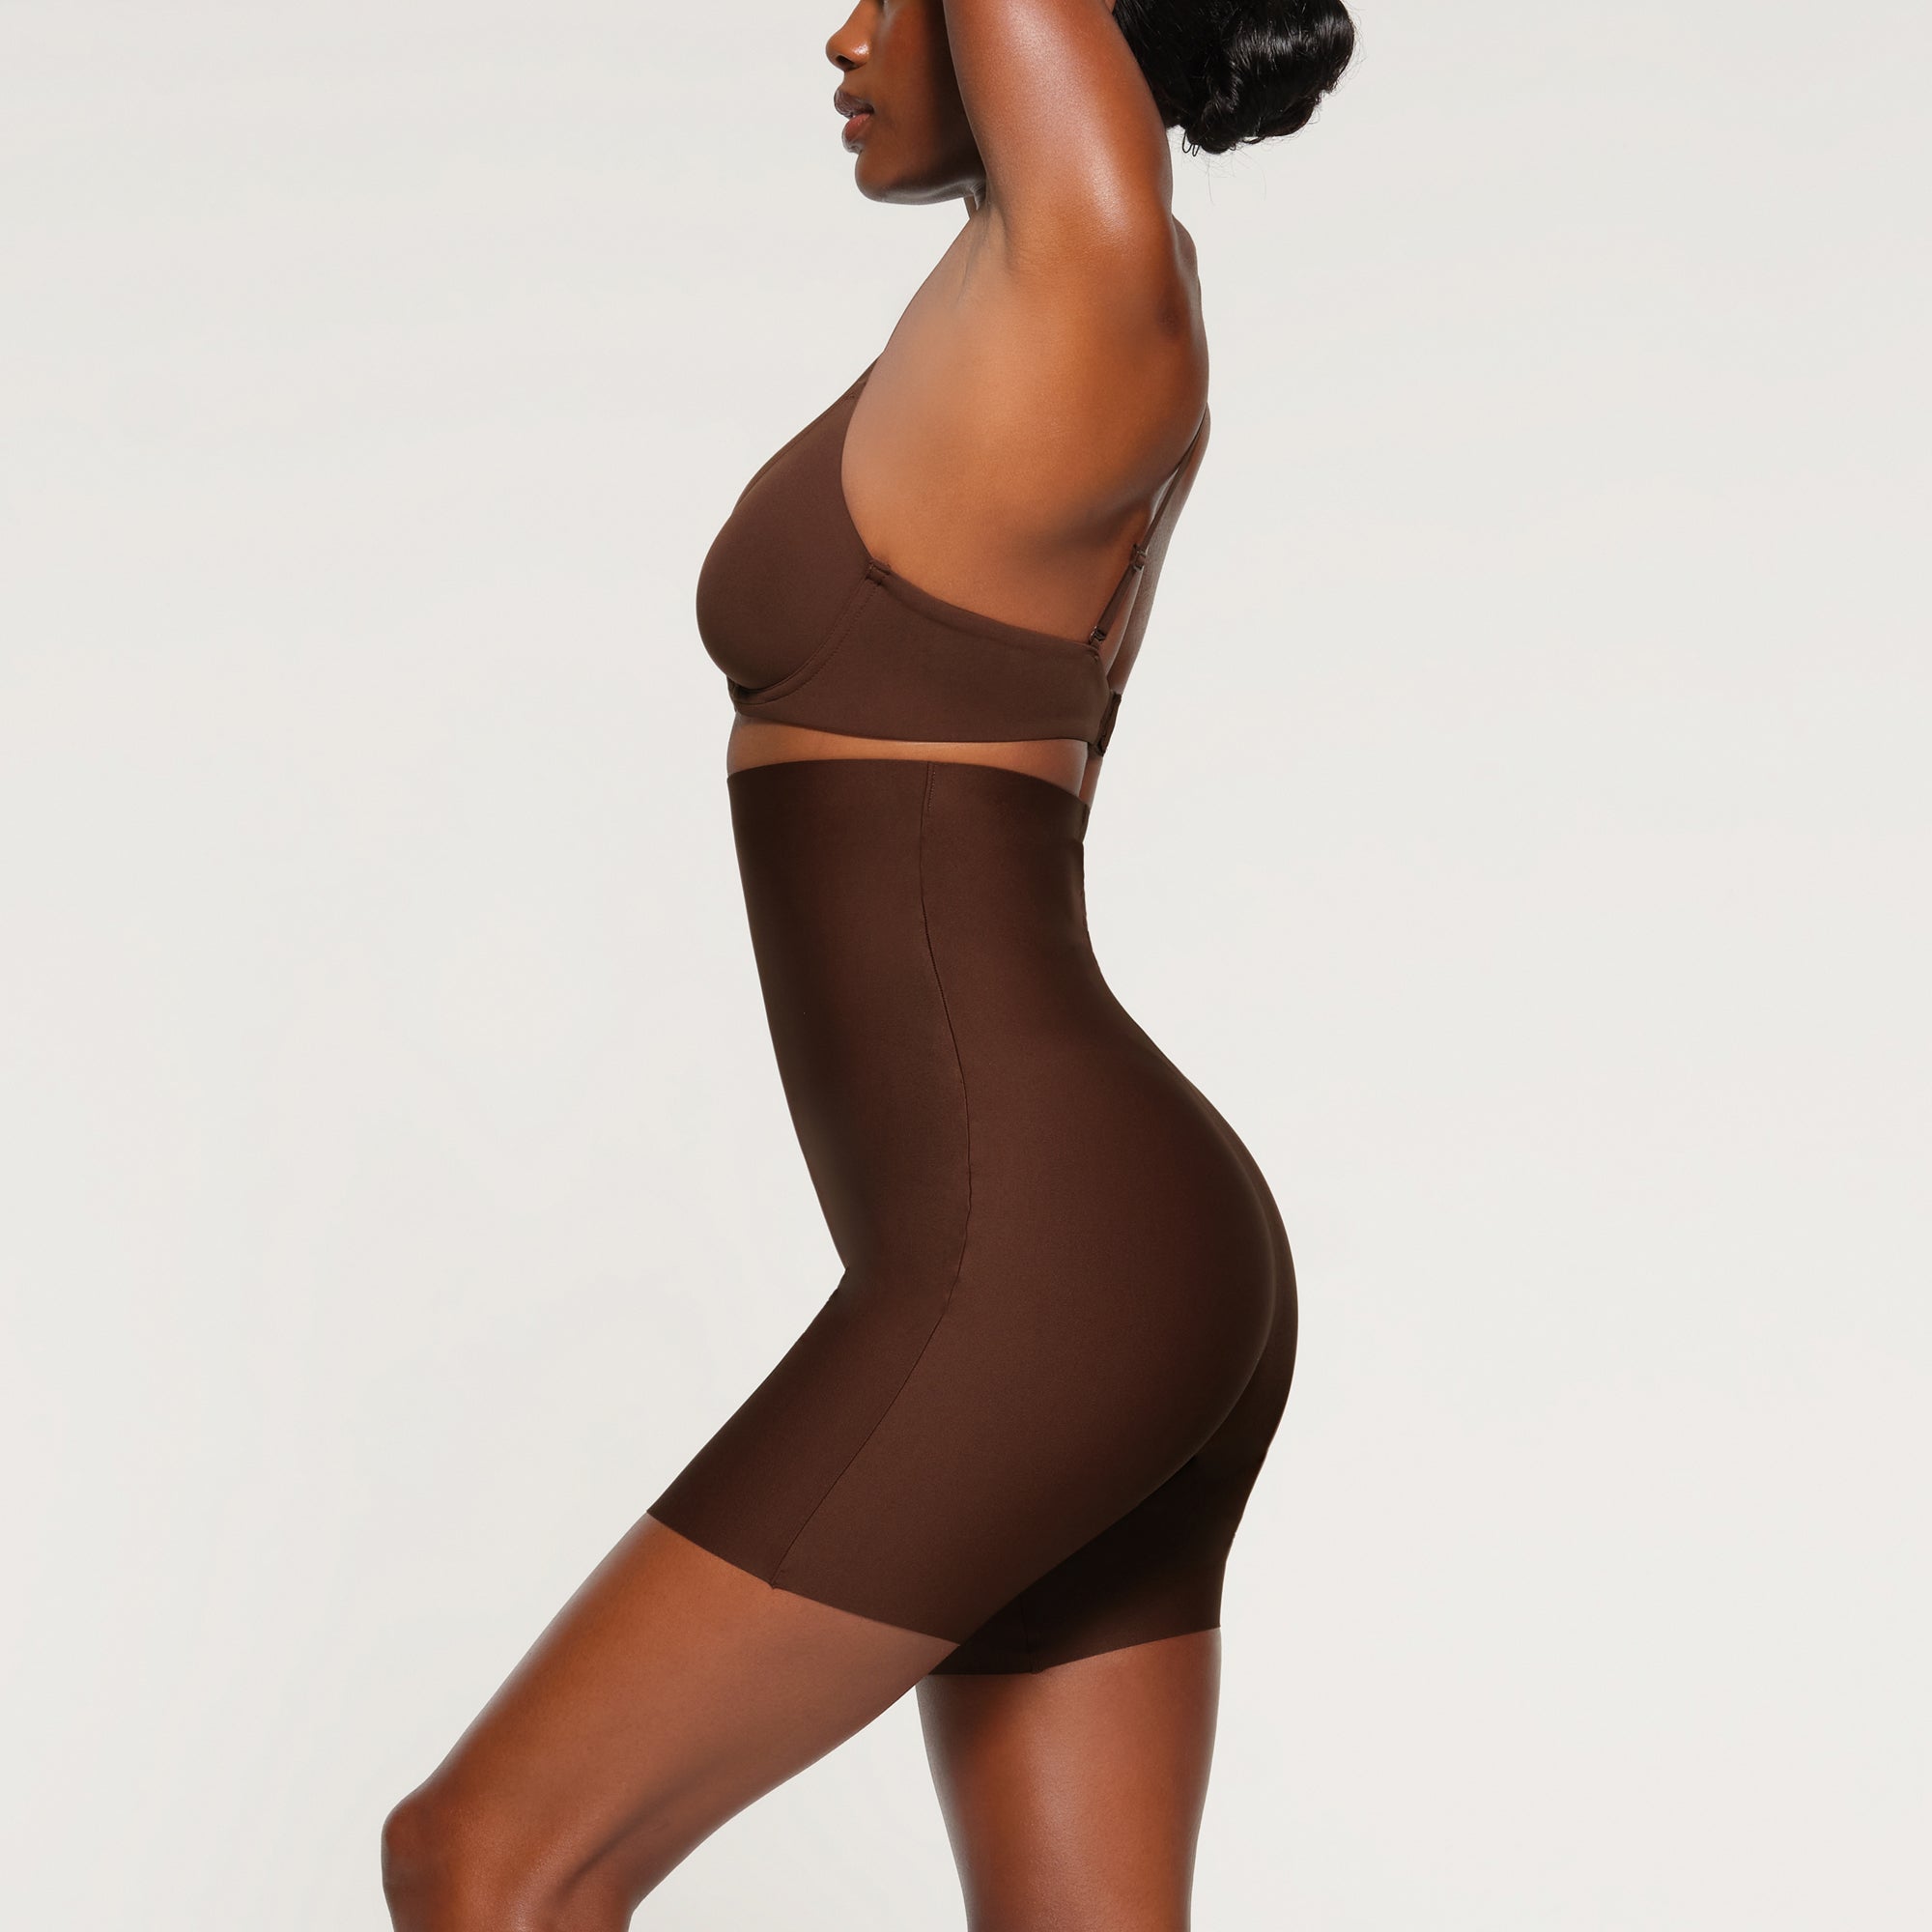 SKIMS Seamless High-Waisted Above The Knee Short - Cocoa